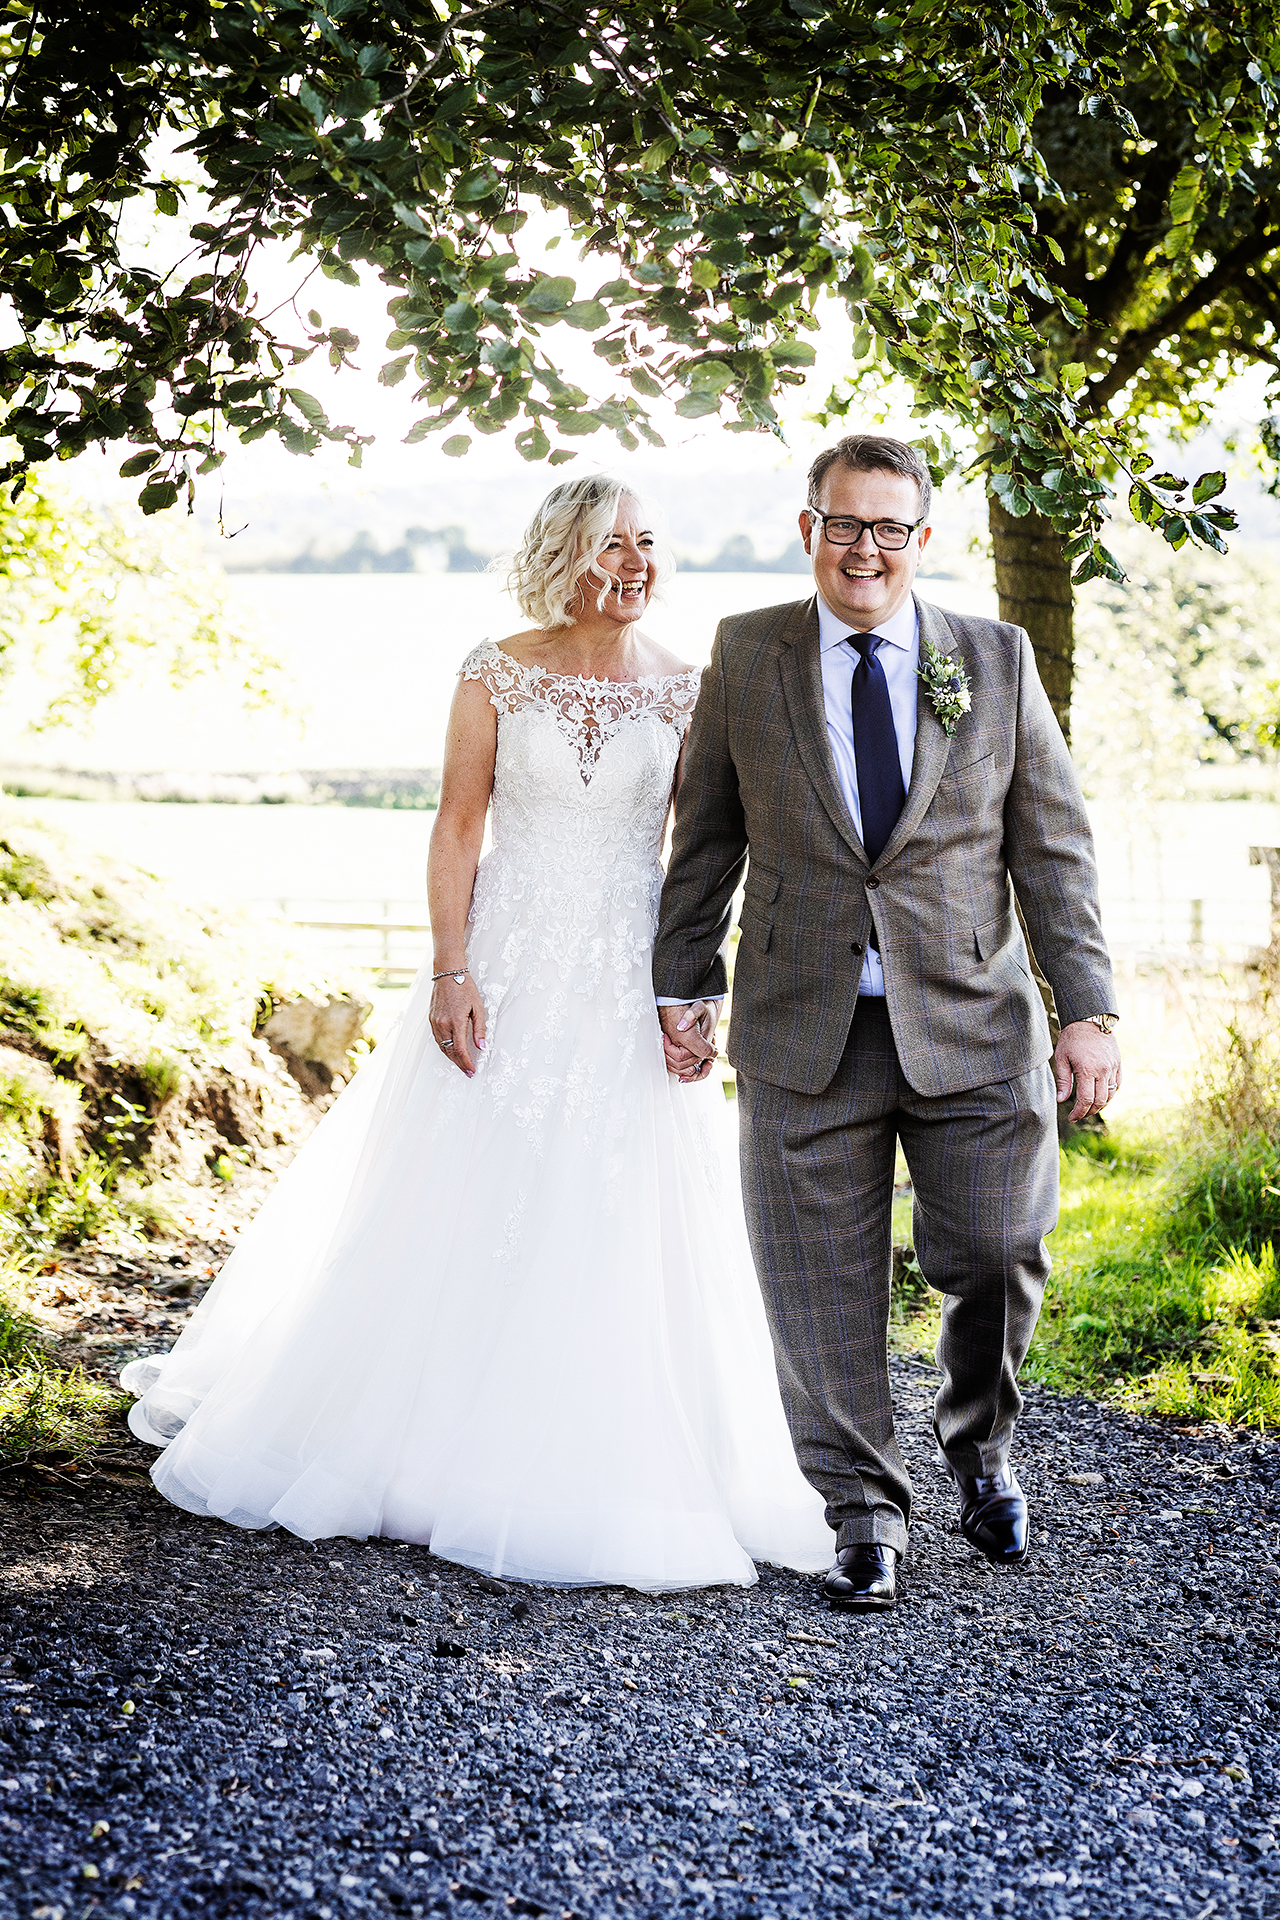 photography of the bride and groom at bash hall barn wedding venue in lancashire